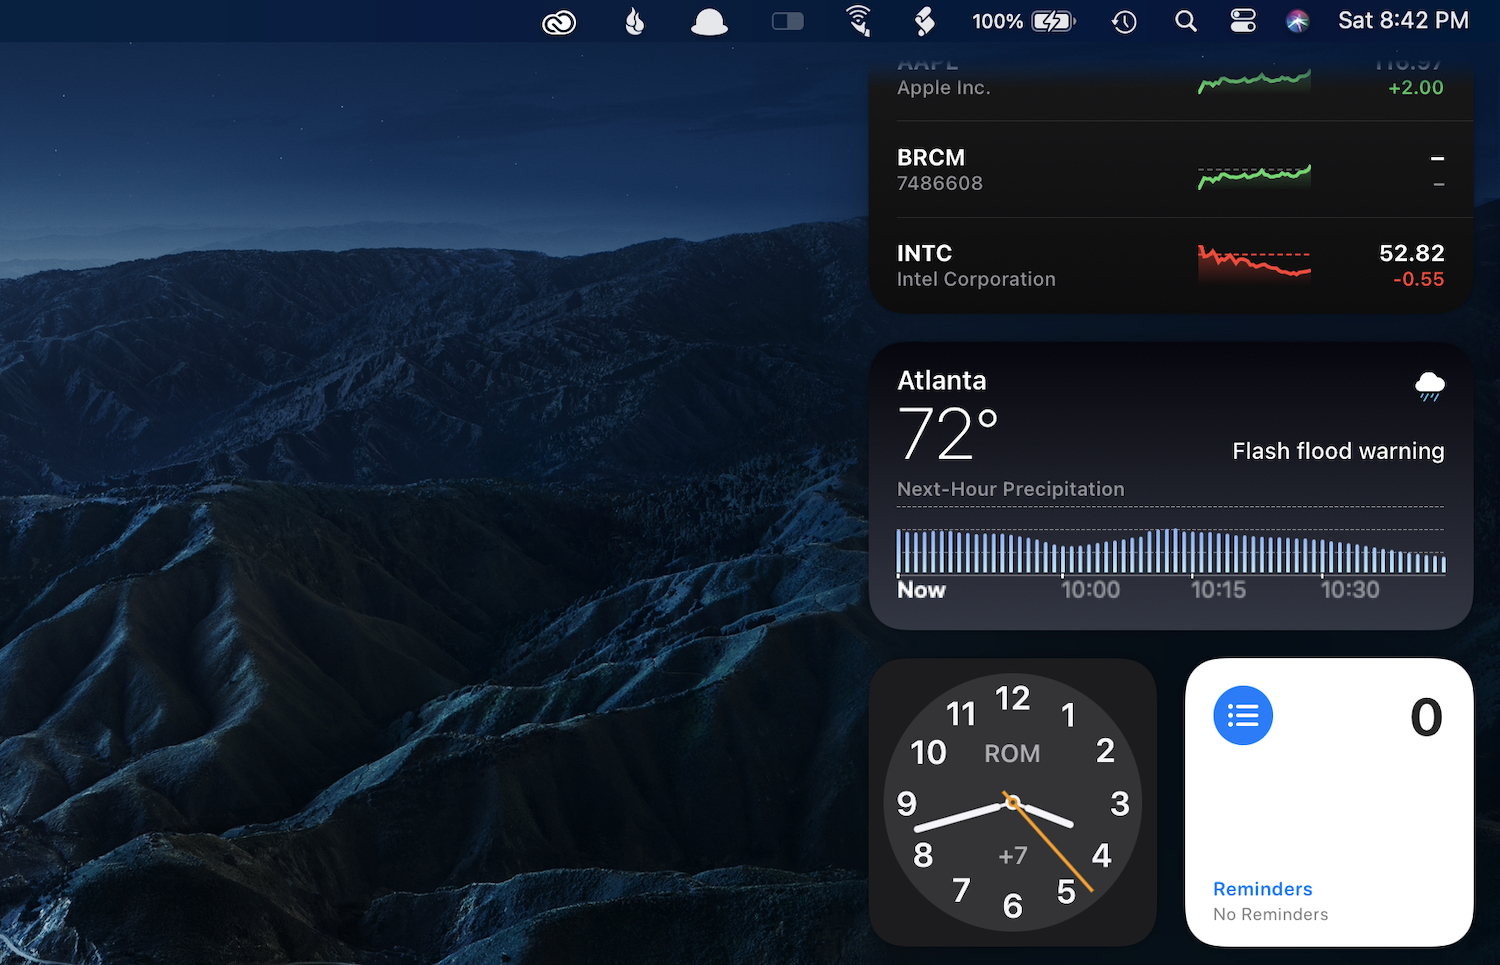 The Weather widget displays severe weather warnings and anticipated precipitation.